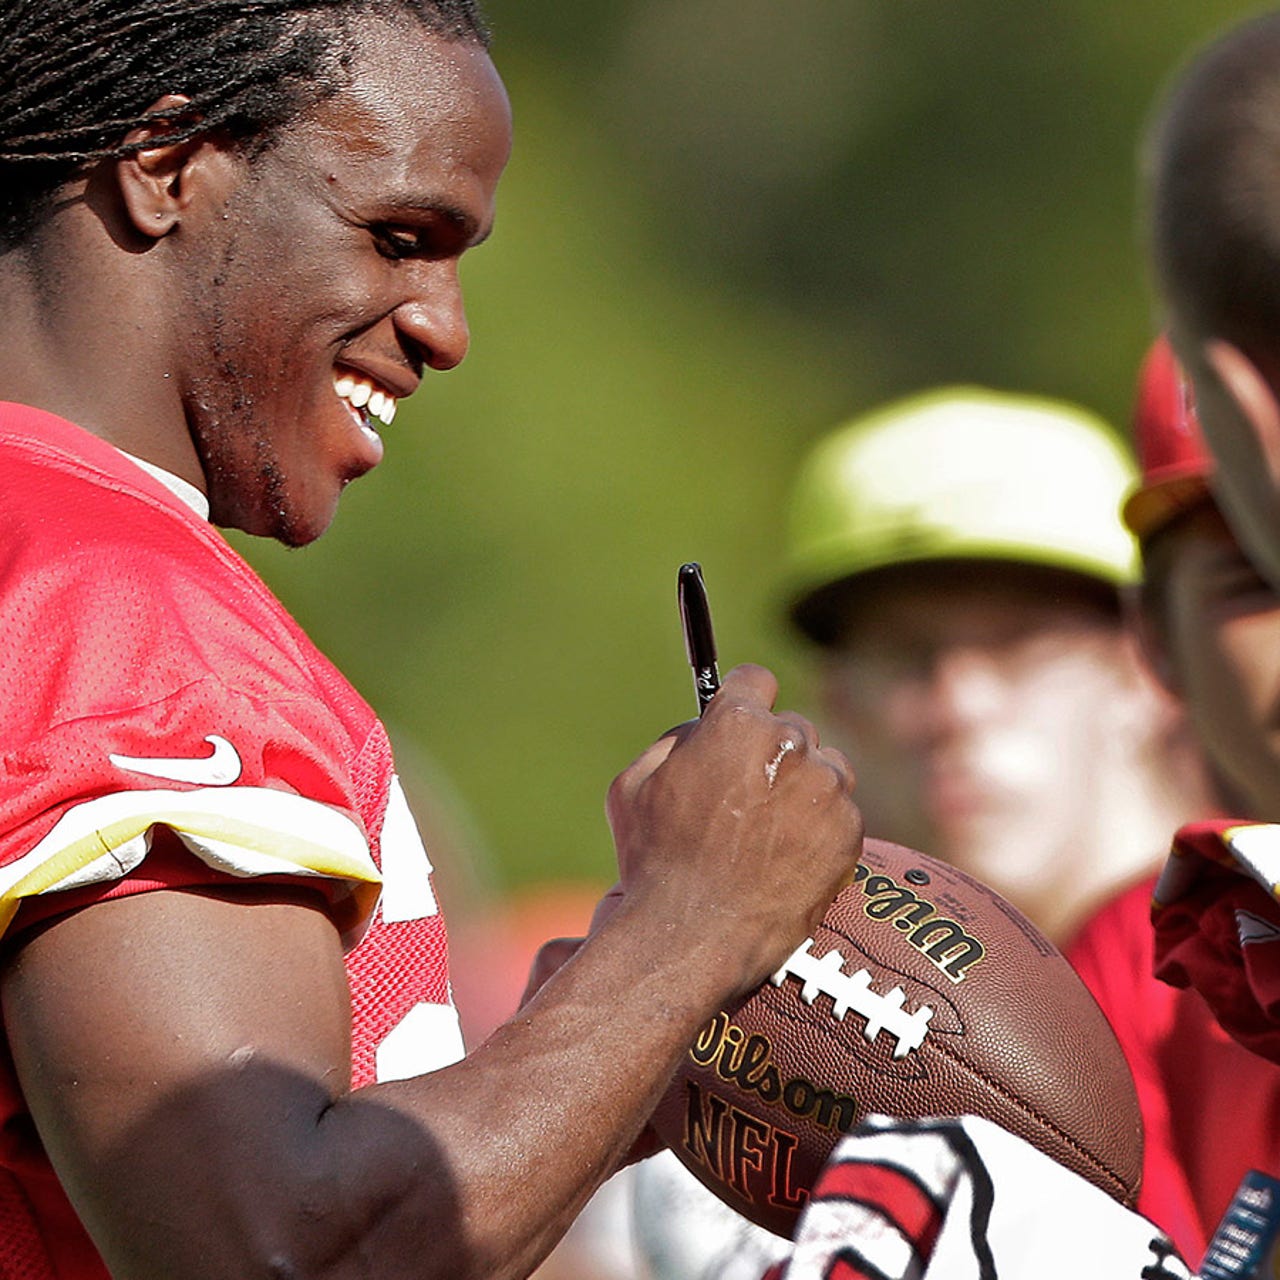 jamaal charles special olympics